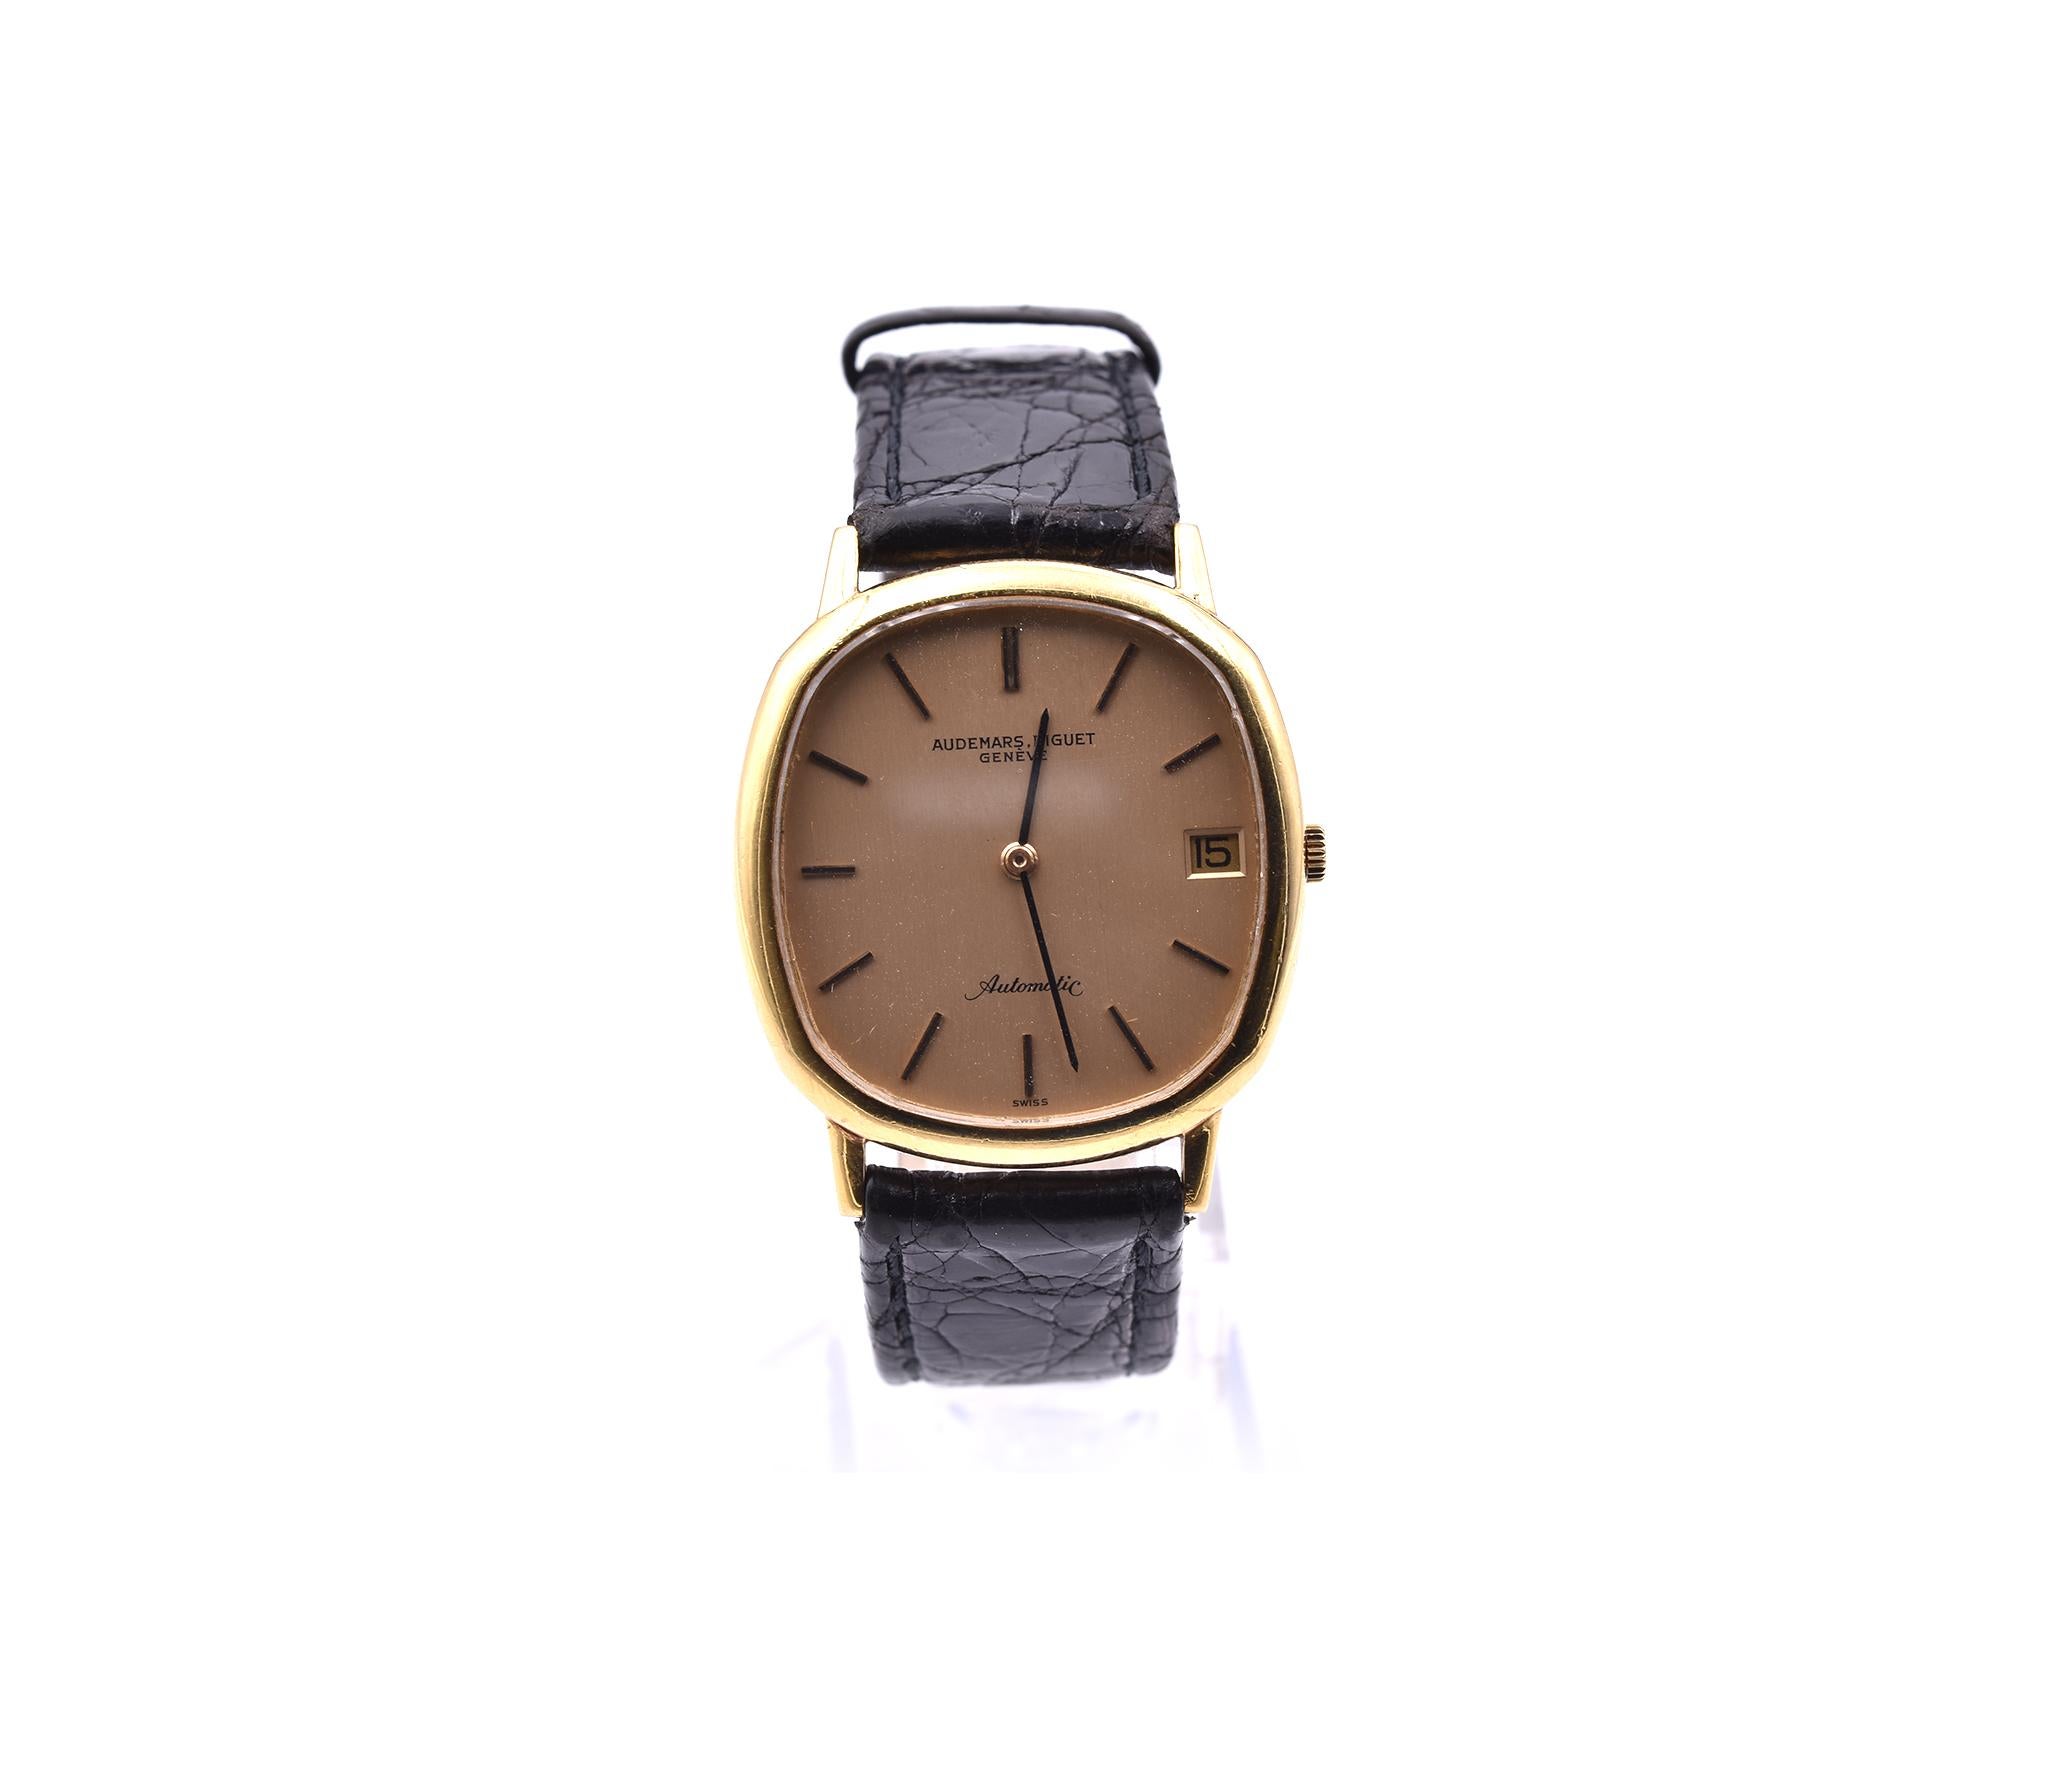 Movement: automatic
Function: hours, minutes, date
Case: cushion 32.50mm x 34.60mm 18k yellow gold case, sapphire crystal, solid case back, pull/push crown
Band: black patent leather with buckle
Dial: gold dial with gold hour markers, gold hands, AP